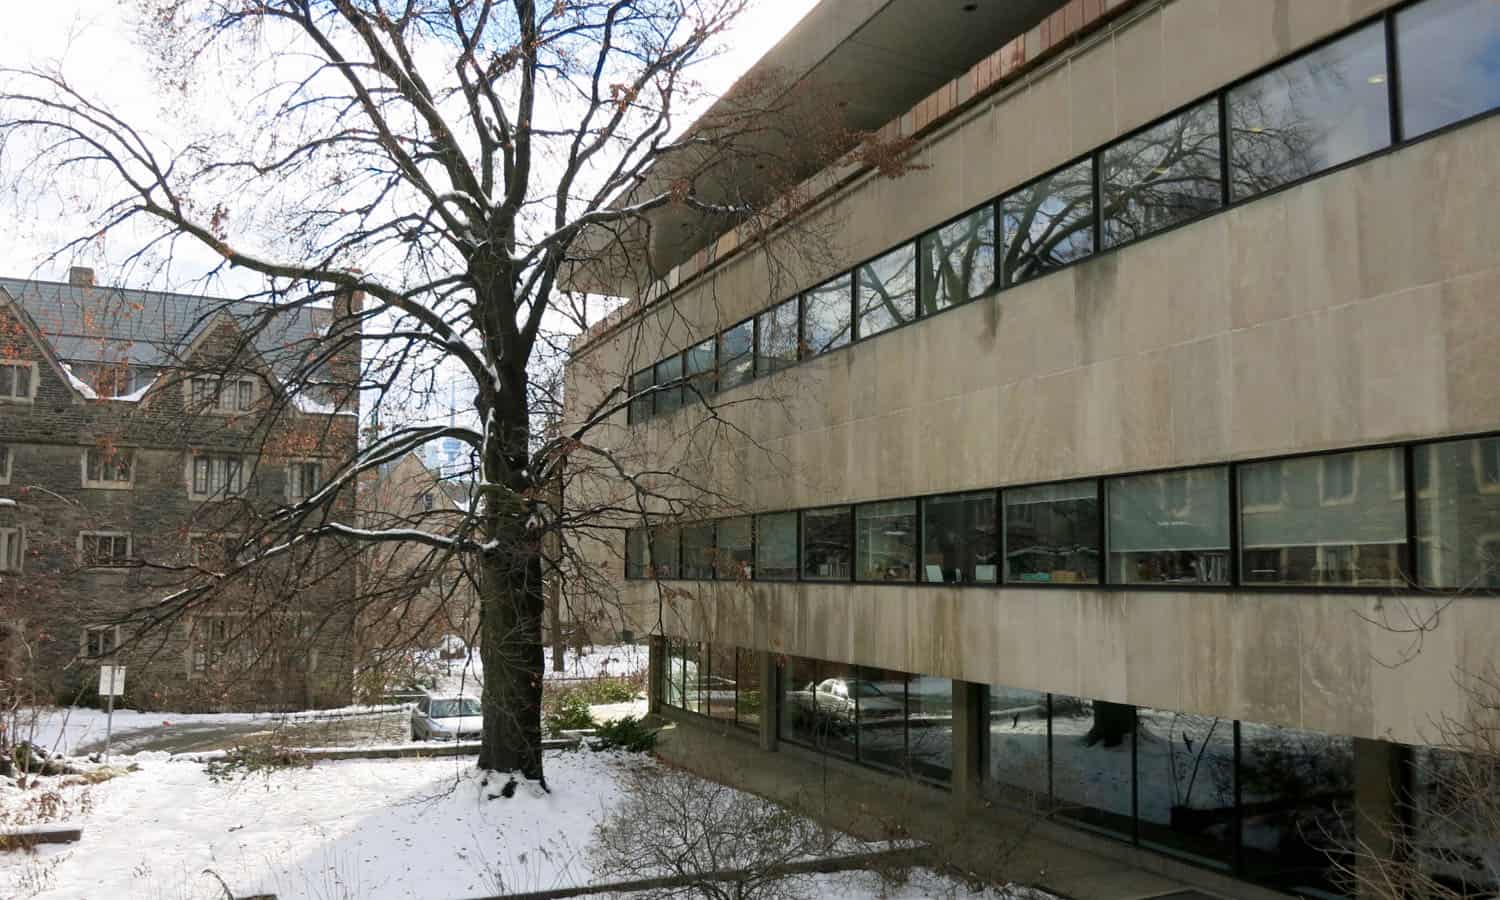 Ribbon windows on the east elevation provide views of Burwash Residence (1931) and the Lester B. Pearson Garden for Peace and Understanding